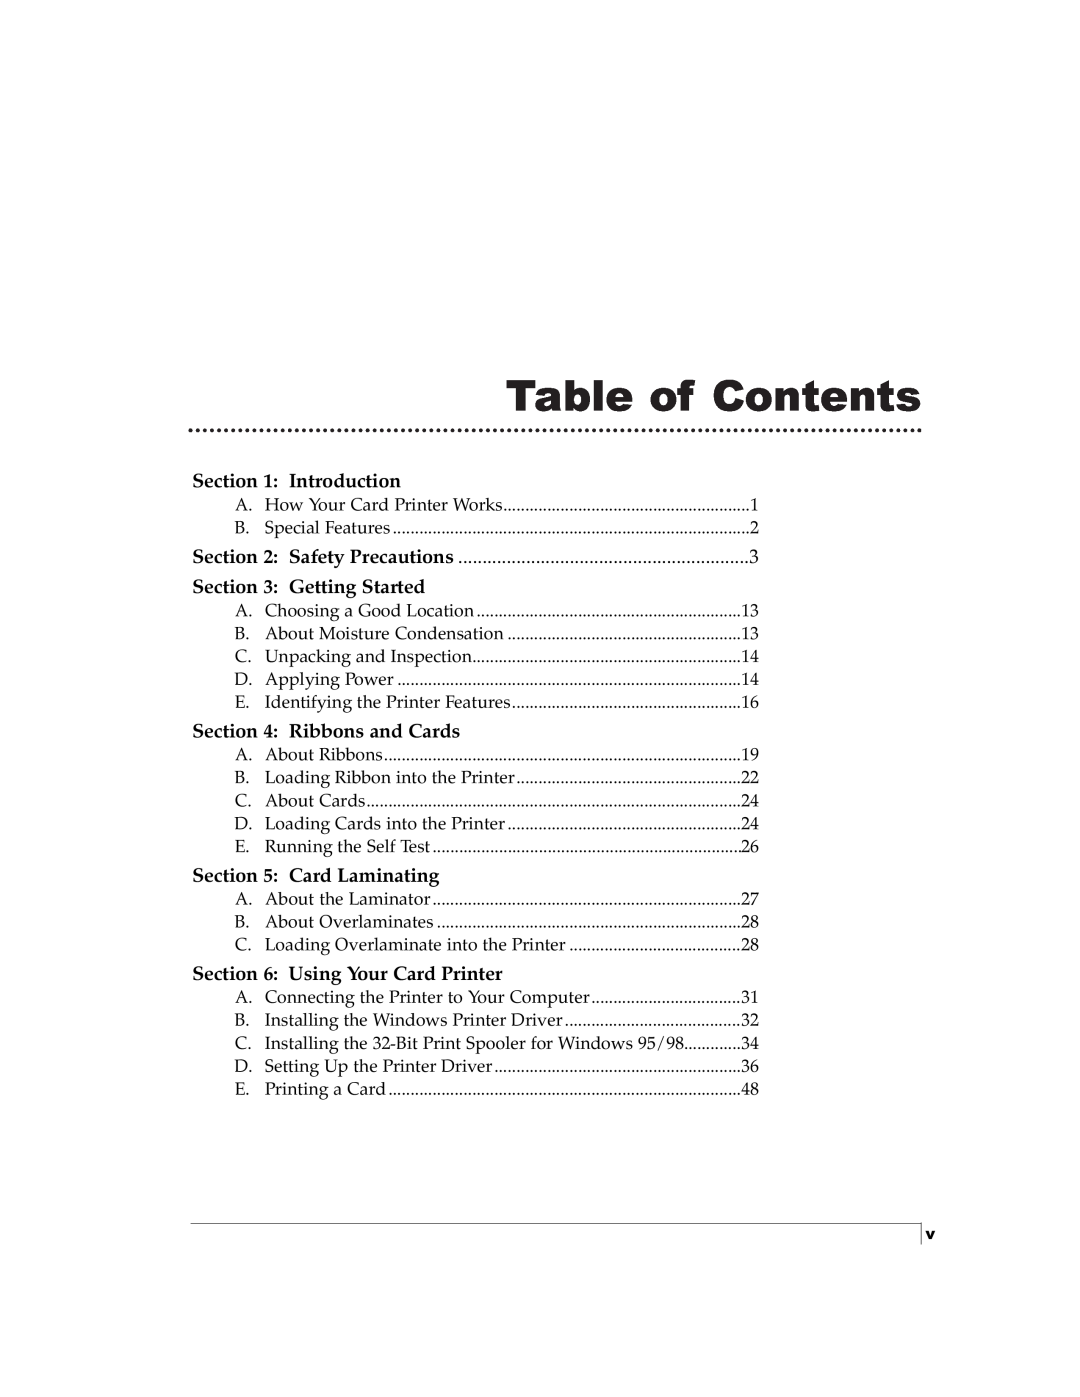 FARGO electronic Pro-L manual Table of Contents, Introduction, Getting Started, Ribbons and Cards, Card Laminating 